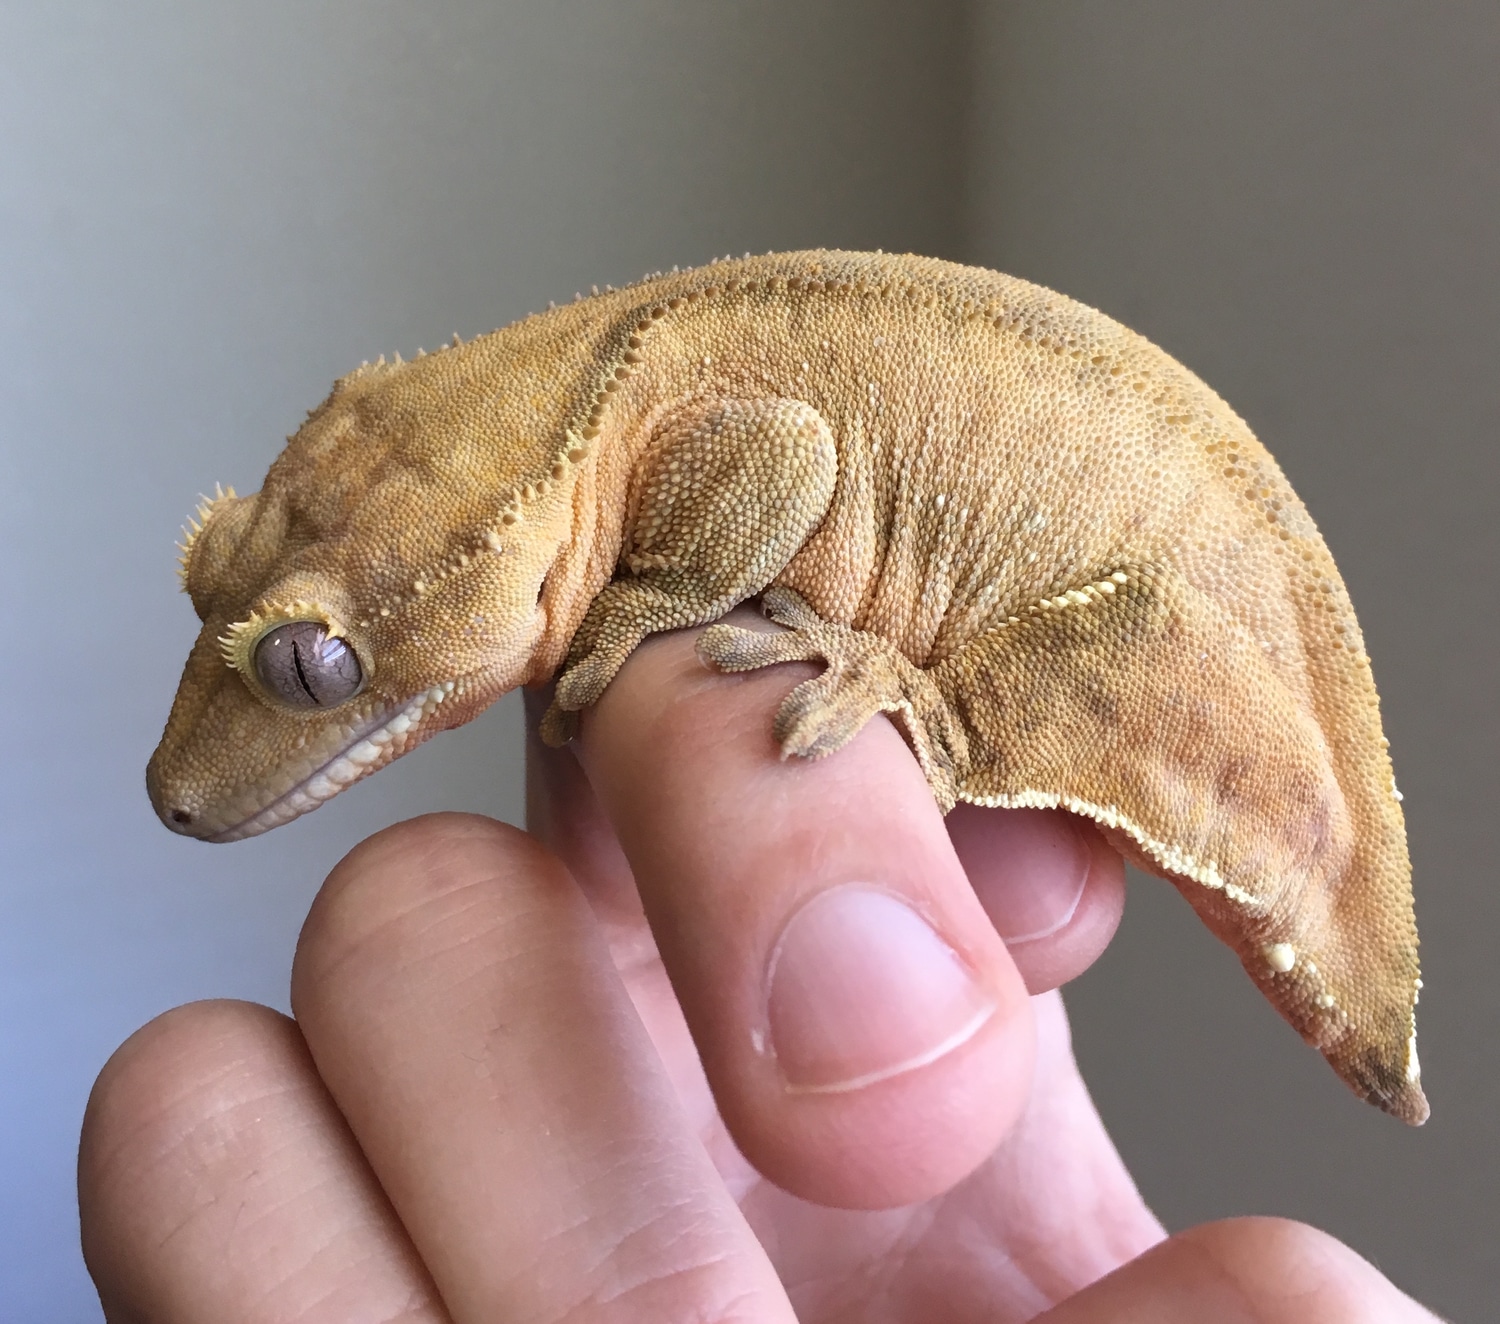 Orange Phantom Patternless Crested Gecko by Contagious Cresties